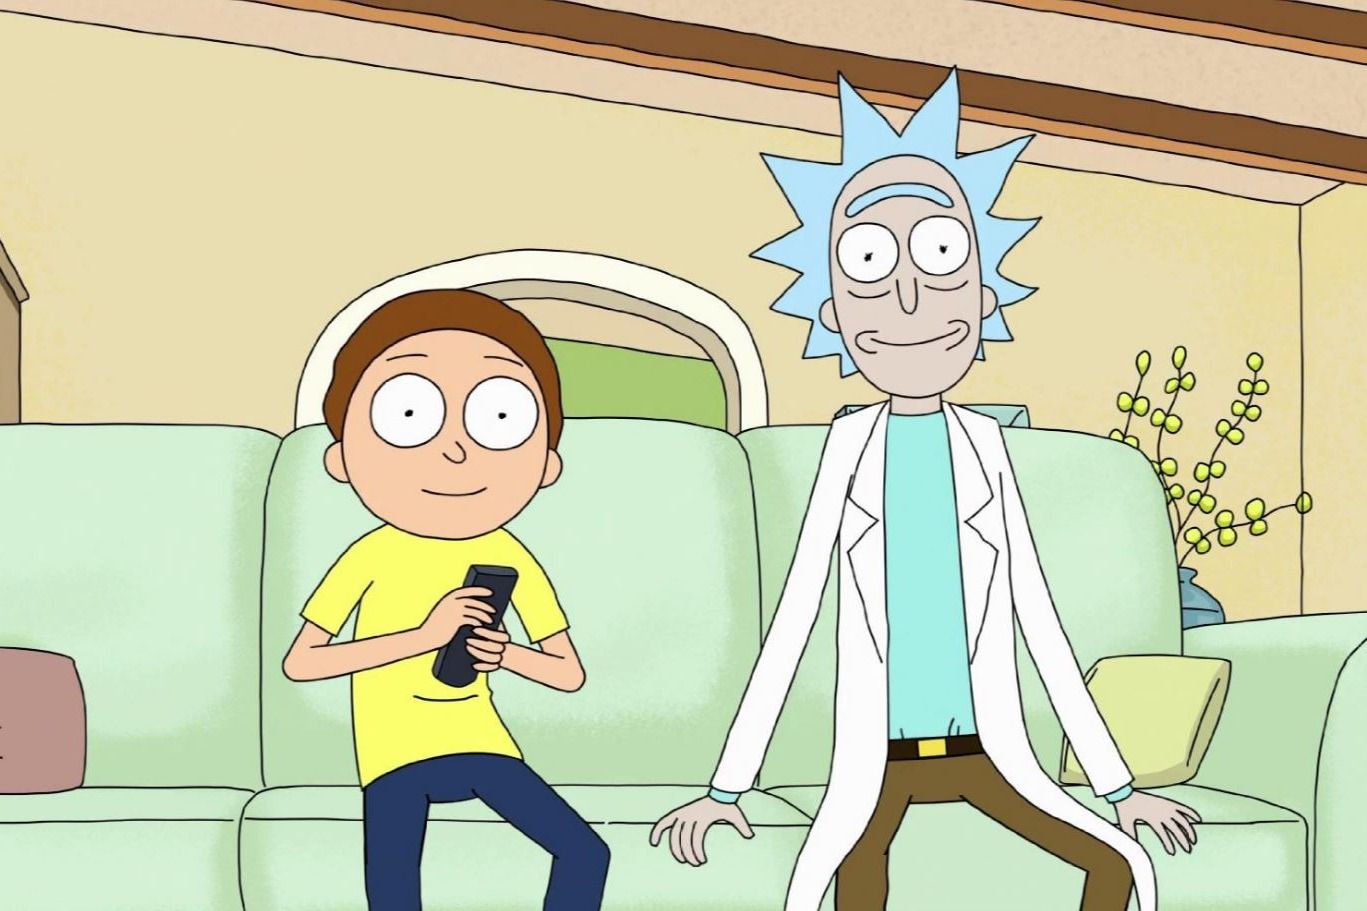 'Rick and Morty' Season 4 Just the Beginning, Adult Swim Orders 70 New